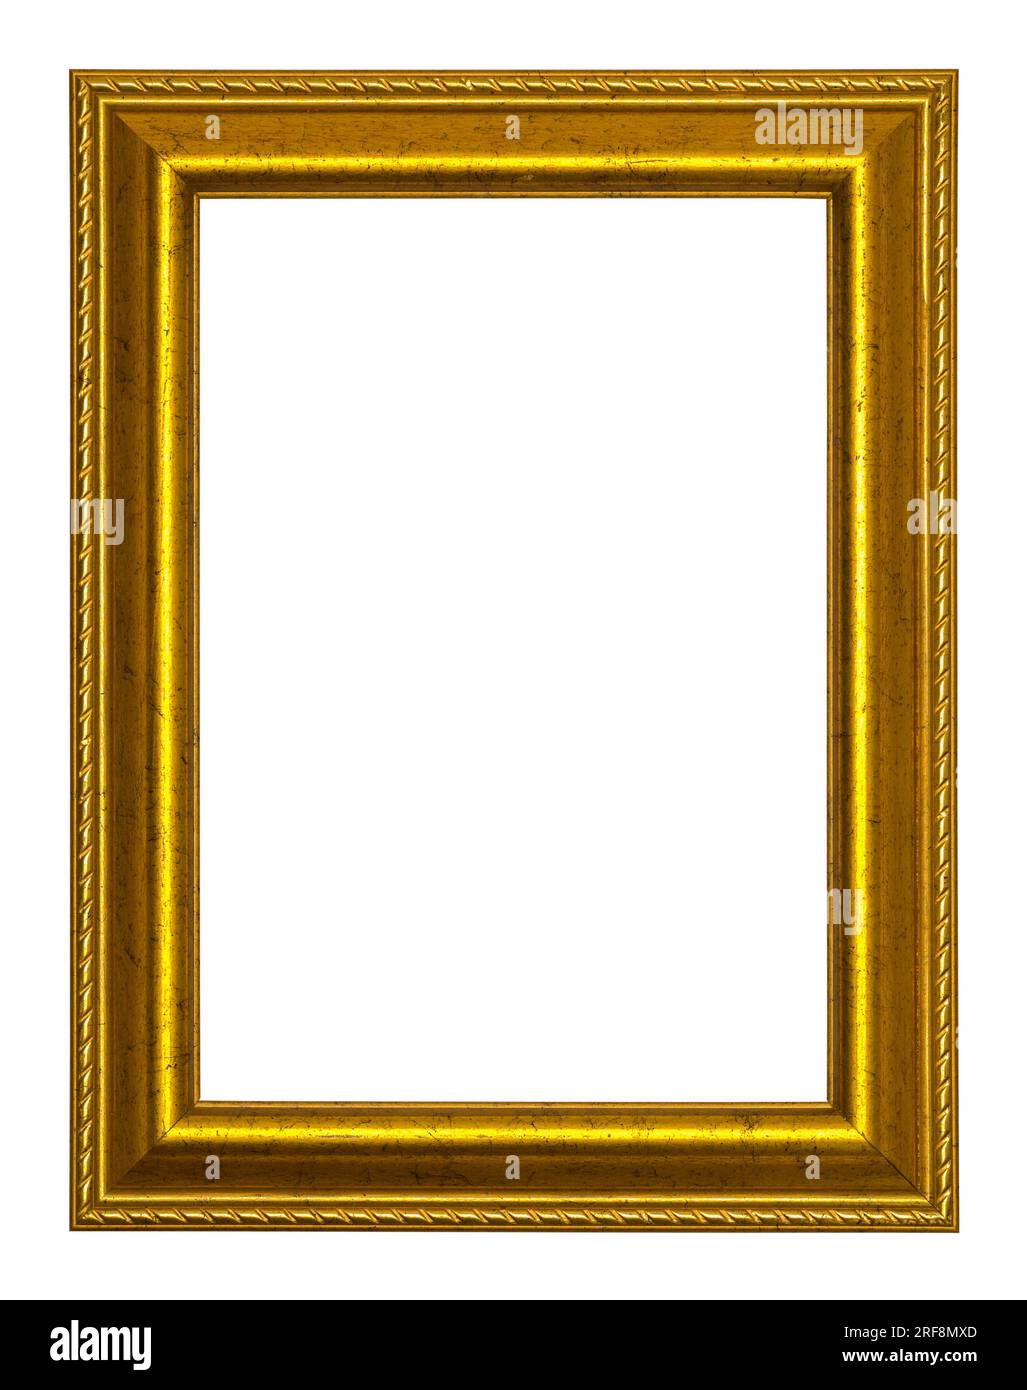 Rectangle Gold Frame Cut Out on White. Stock Photo